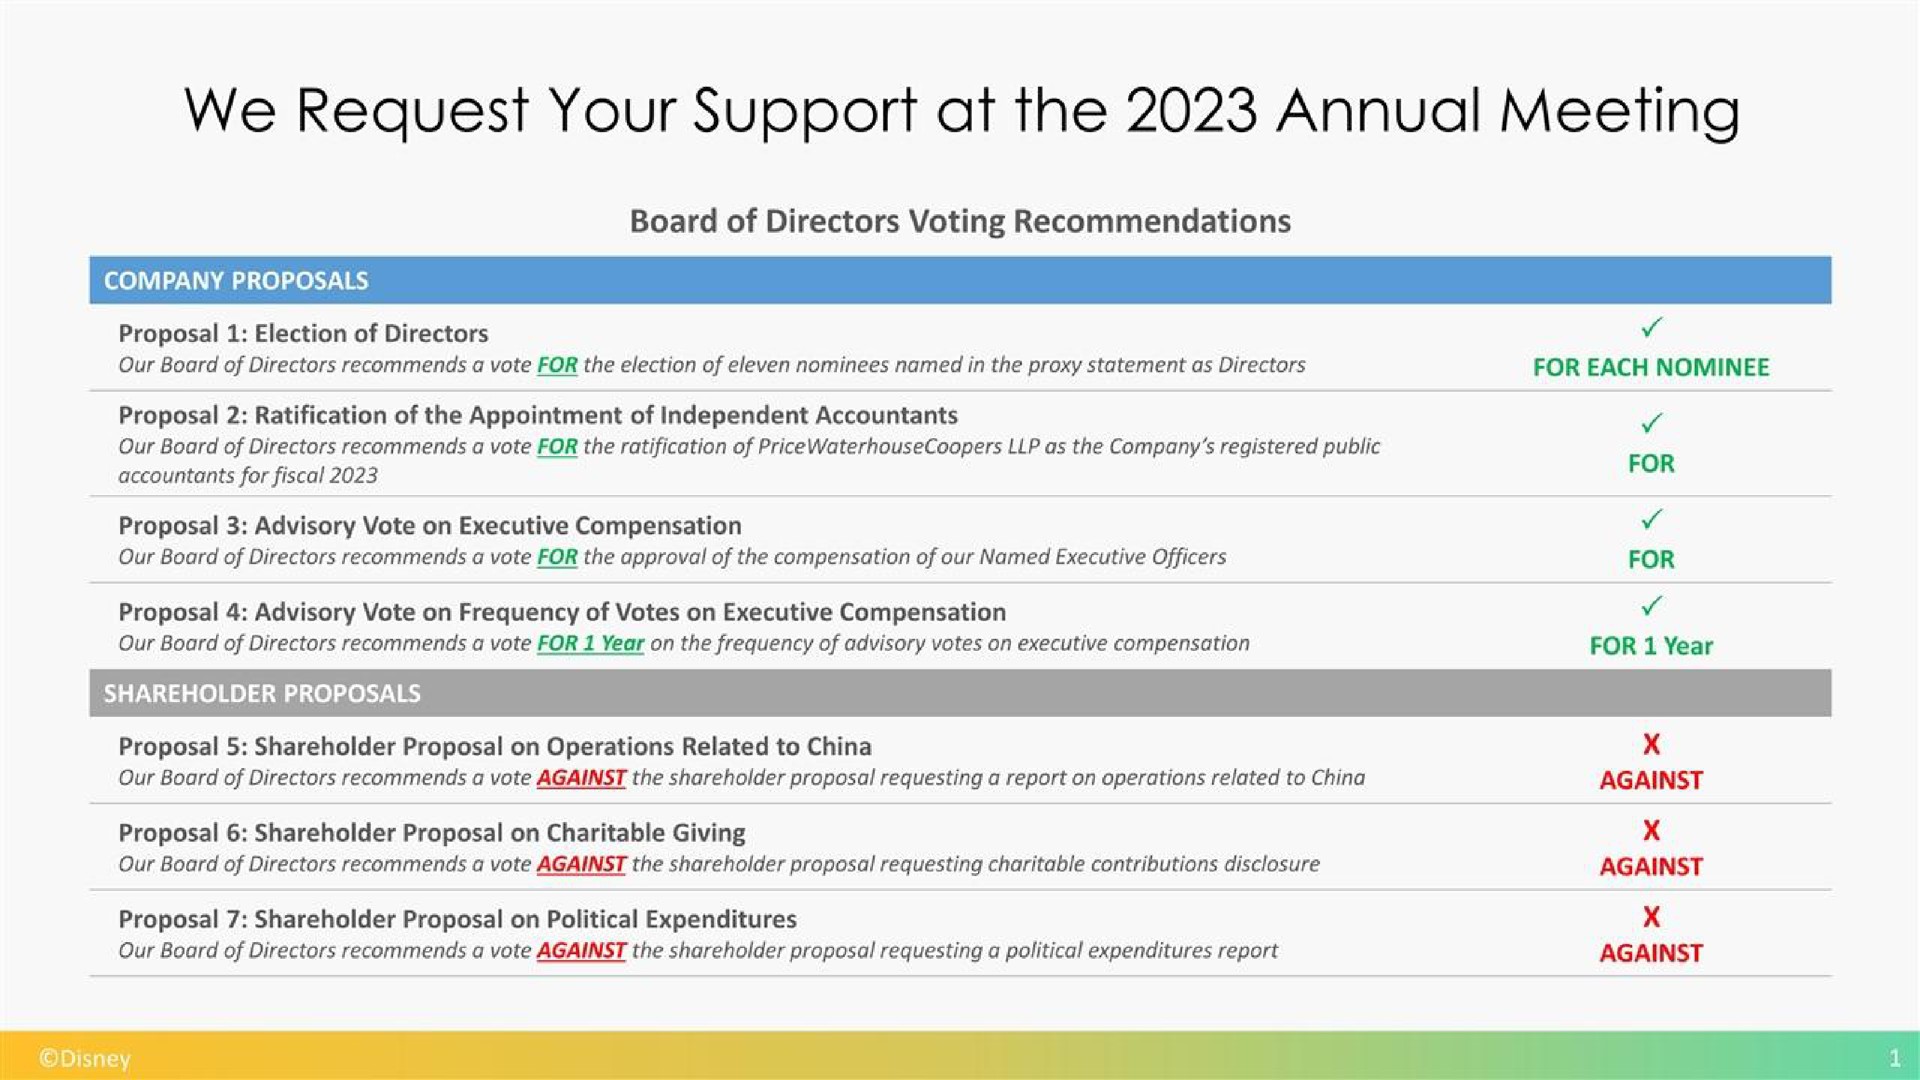 we request your support at the annual meeting | Disney